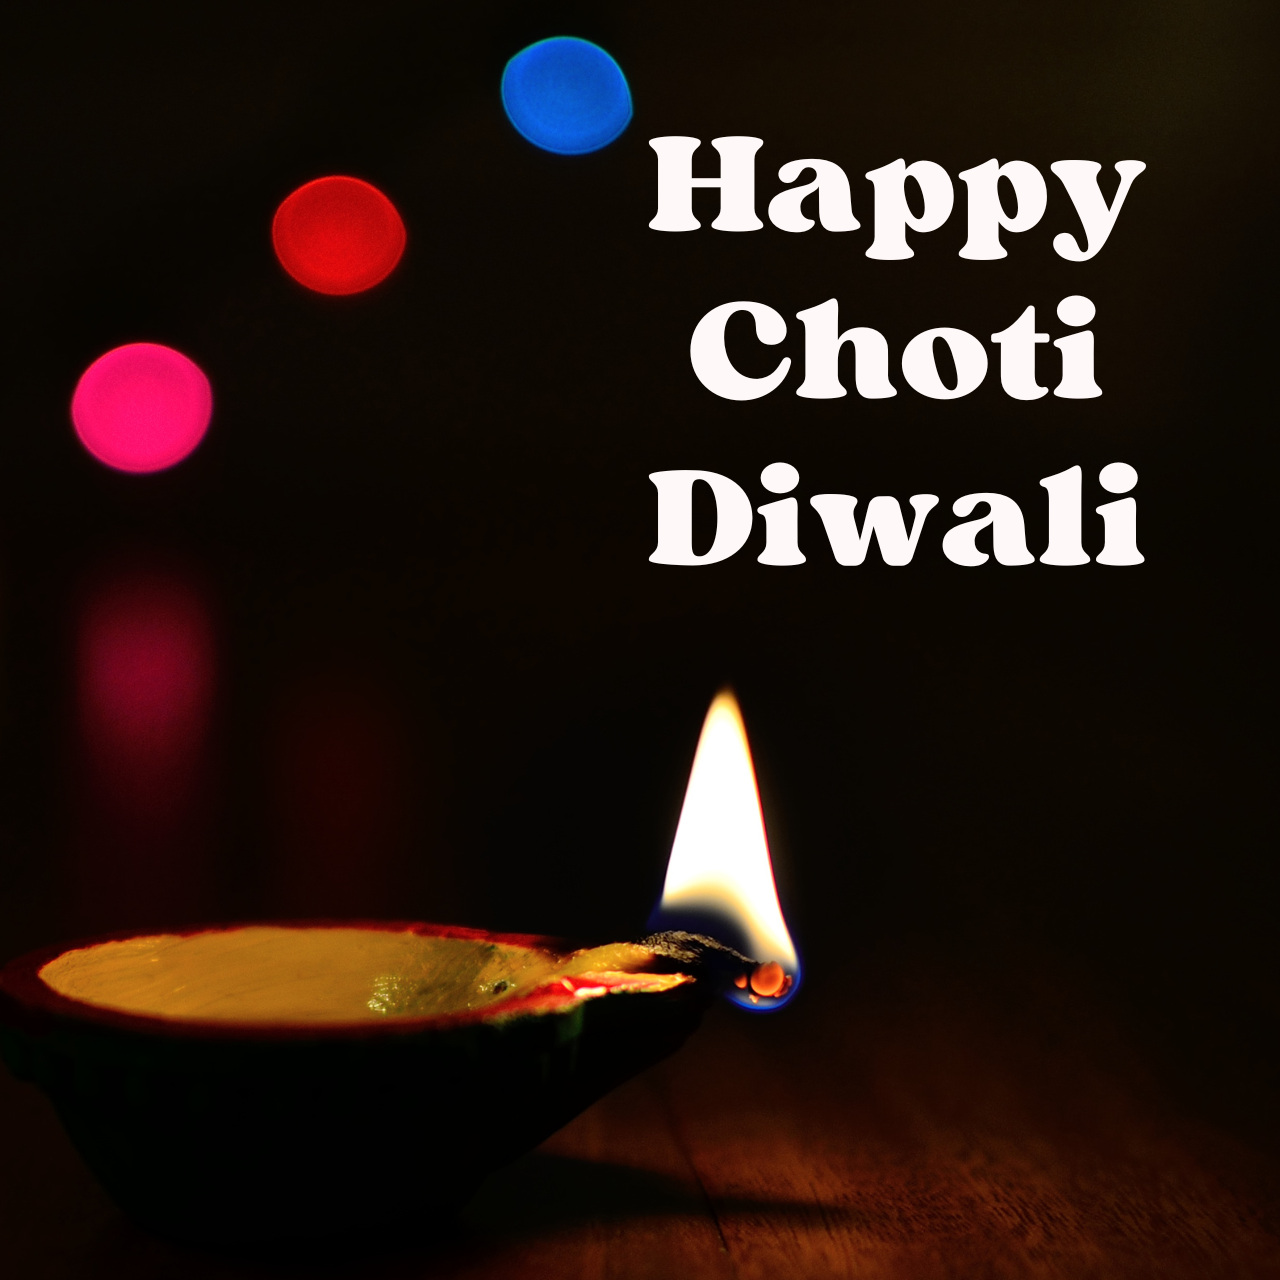 Happy Choti Diwali 2023 Best Hindi Wishes, Images, Messages, Greetings, Quotes, Sayings, Posters, Shayari, Banners, and Instagram Captions